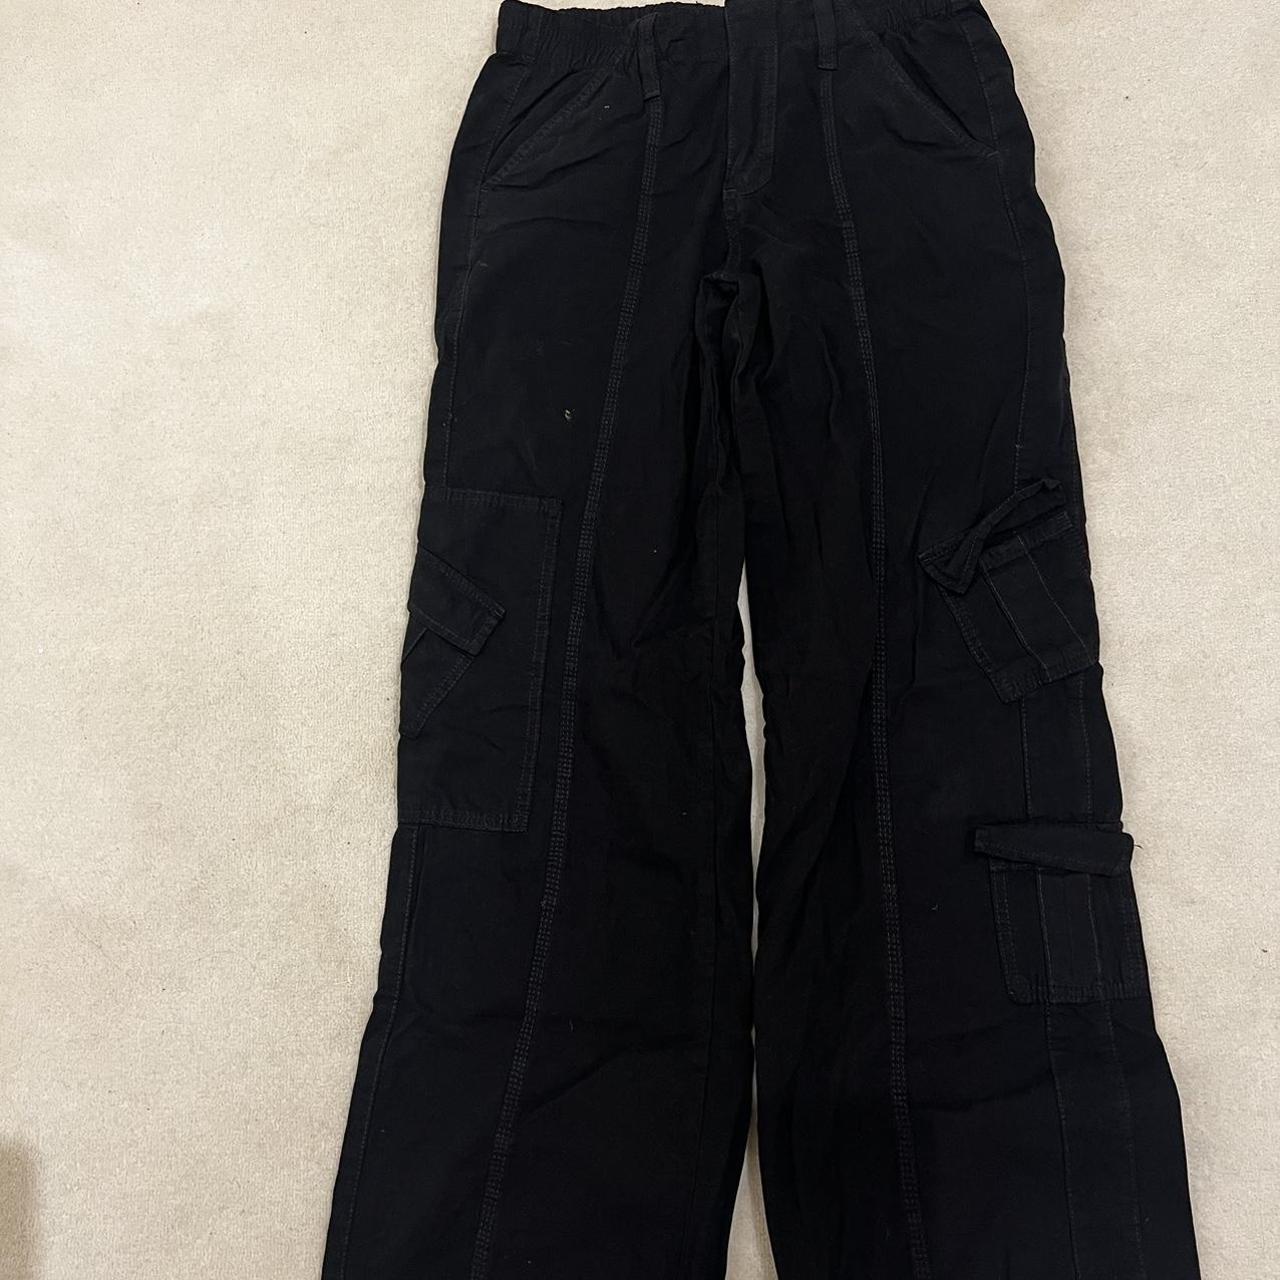 black urban outfitters cargos size M I have two:one... - Depop